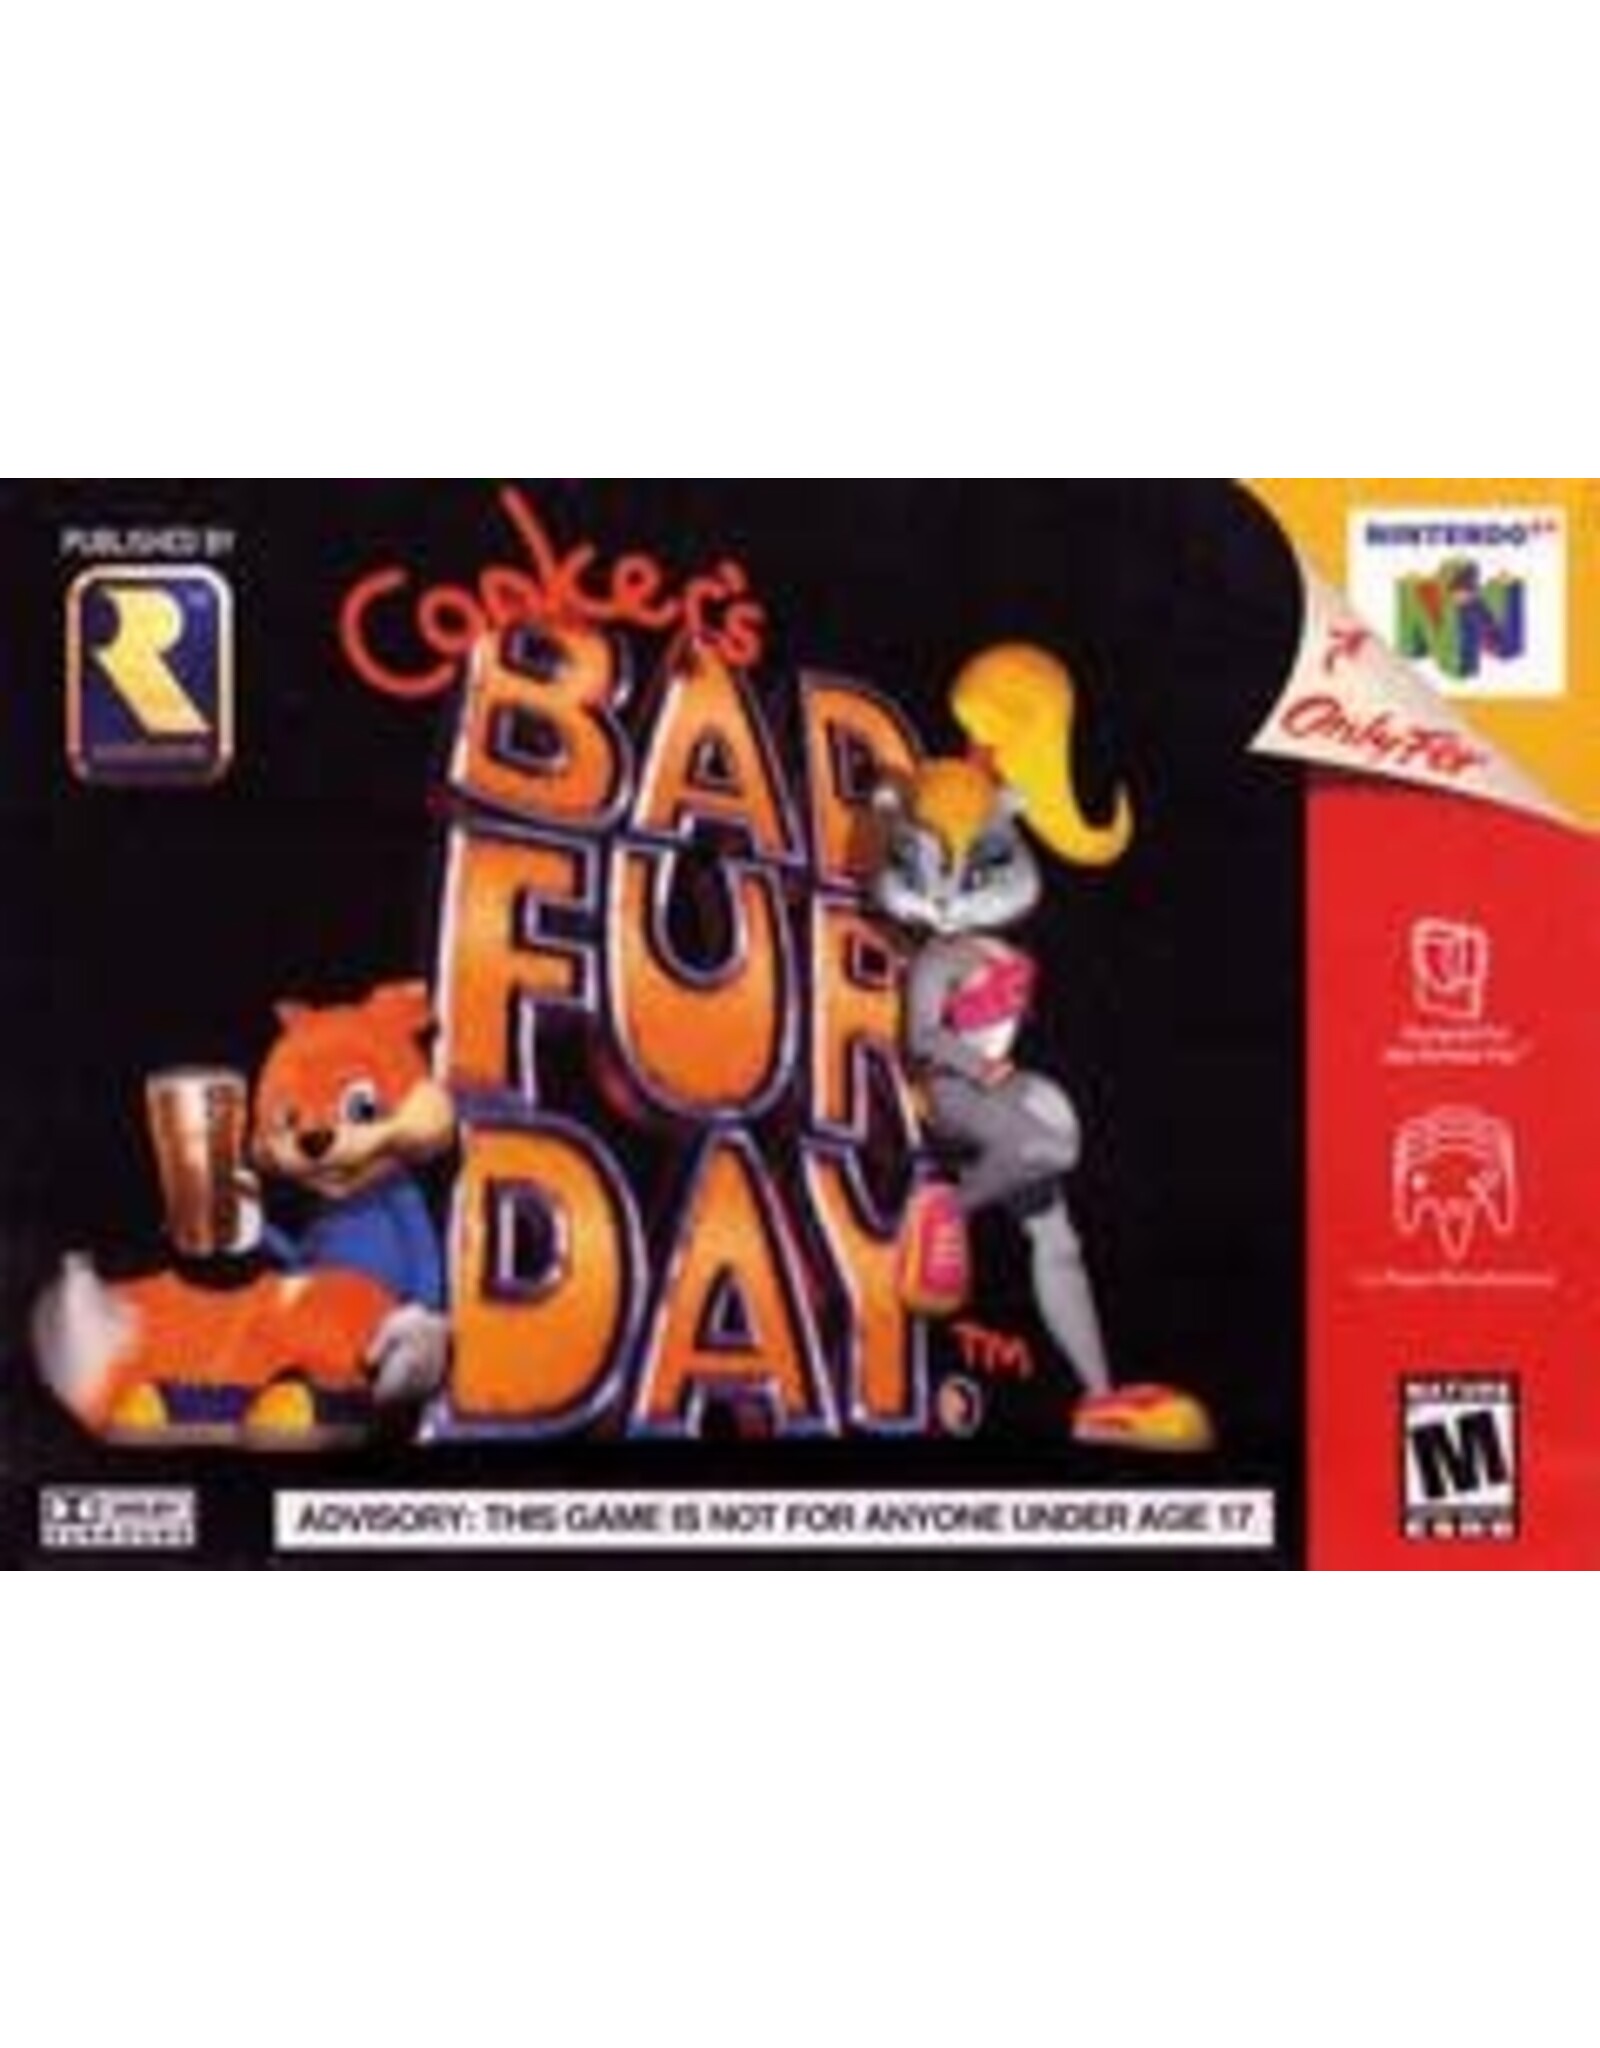 Nintendo 64 Conker's Bad Fur Day (Used, Cosmetic Damage)